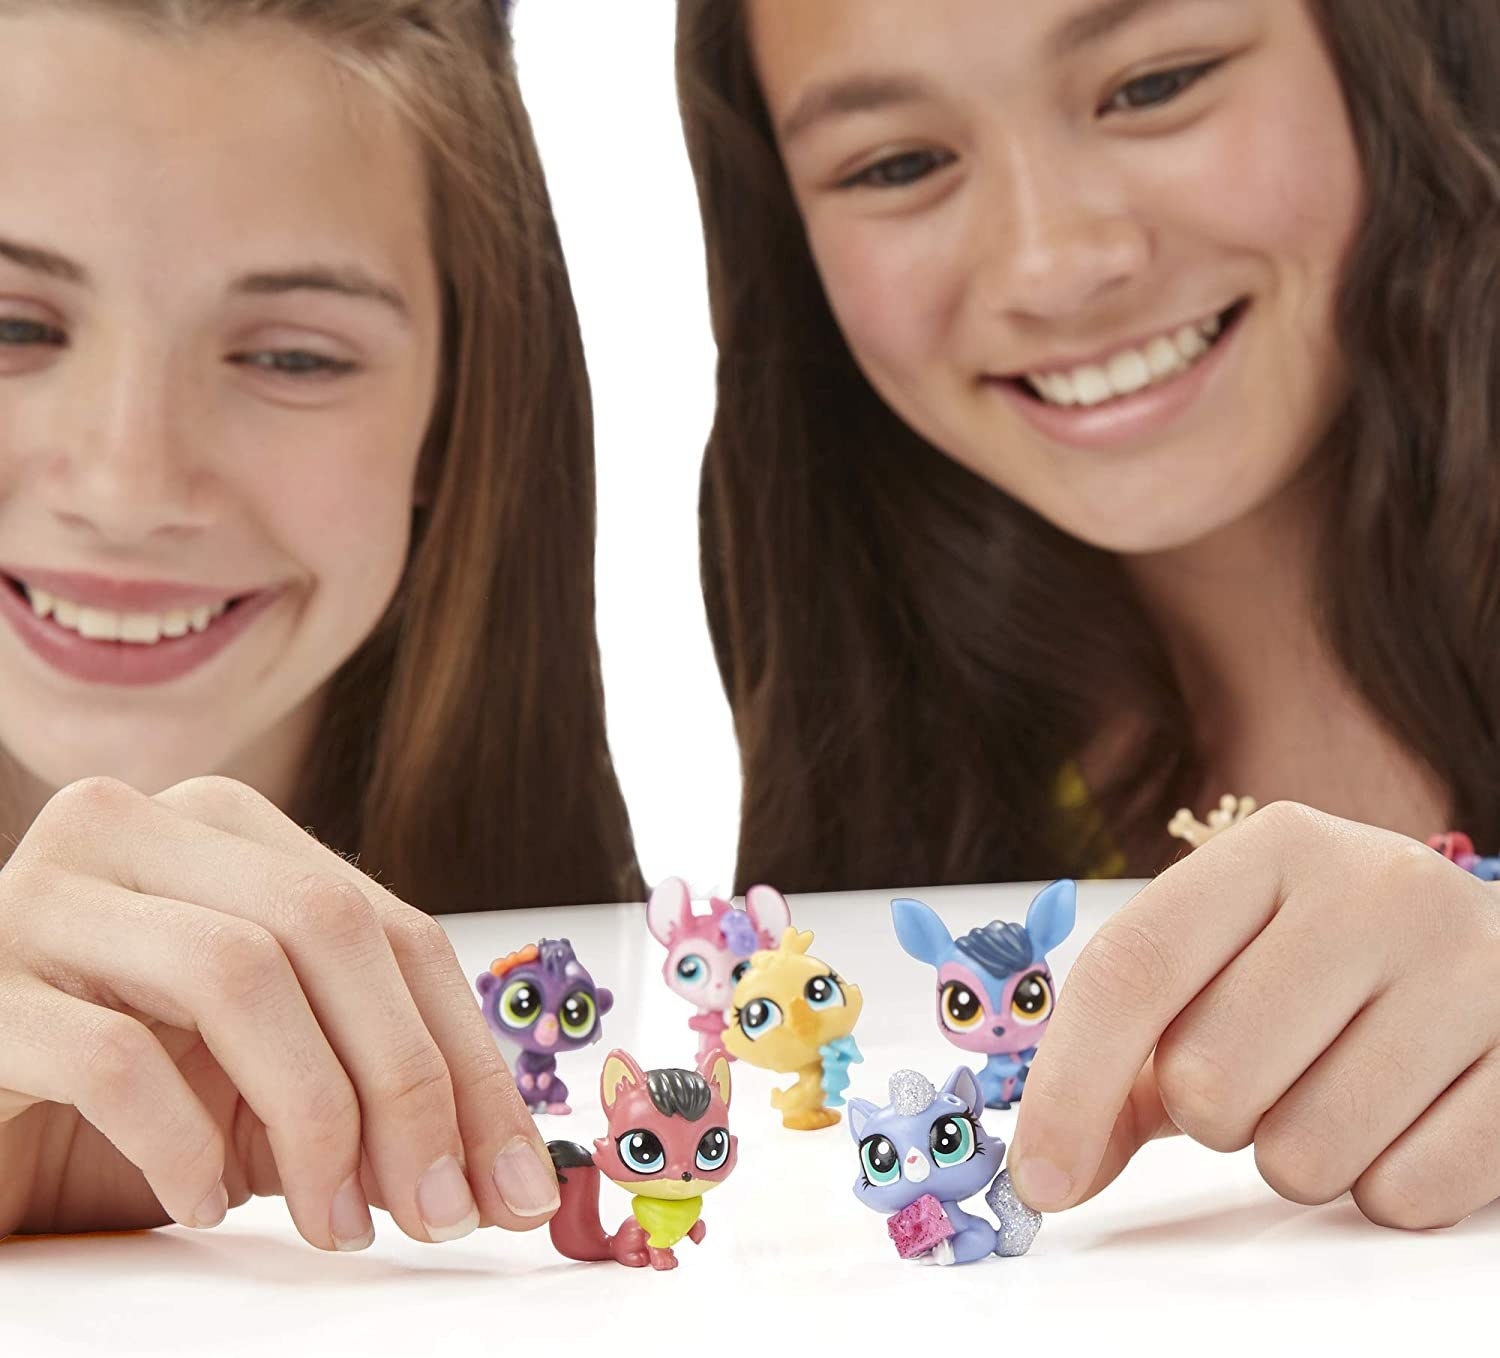 kids playing with the mini pet figures